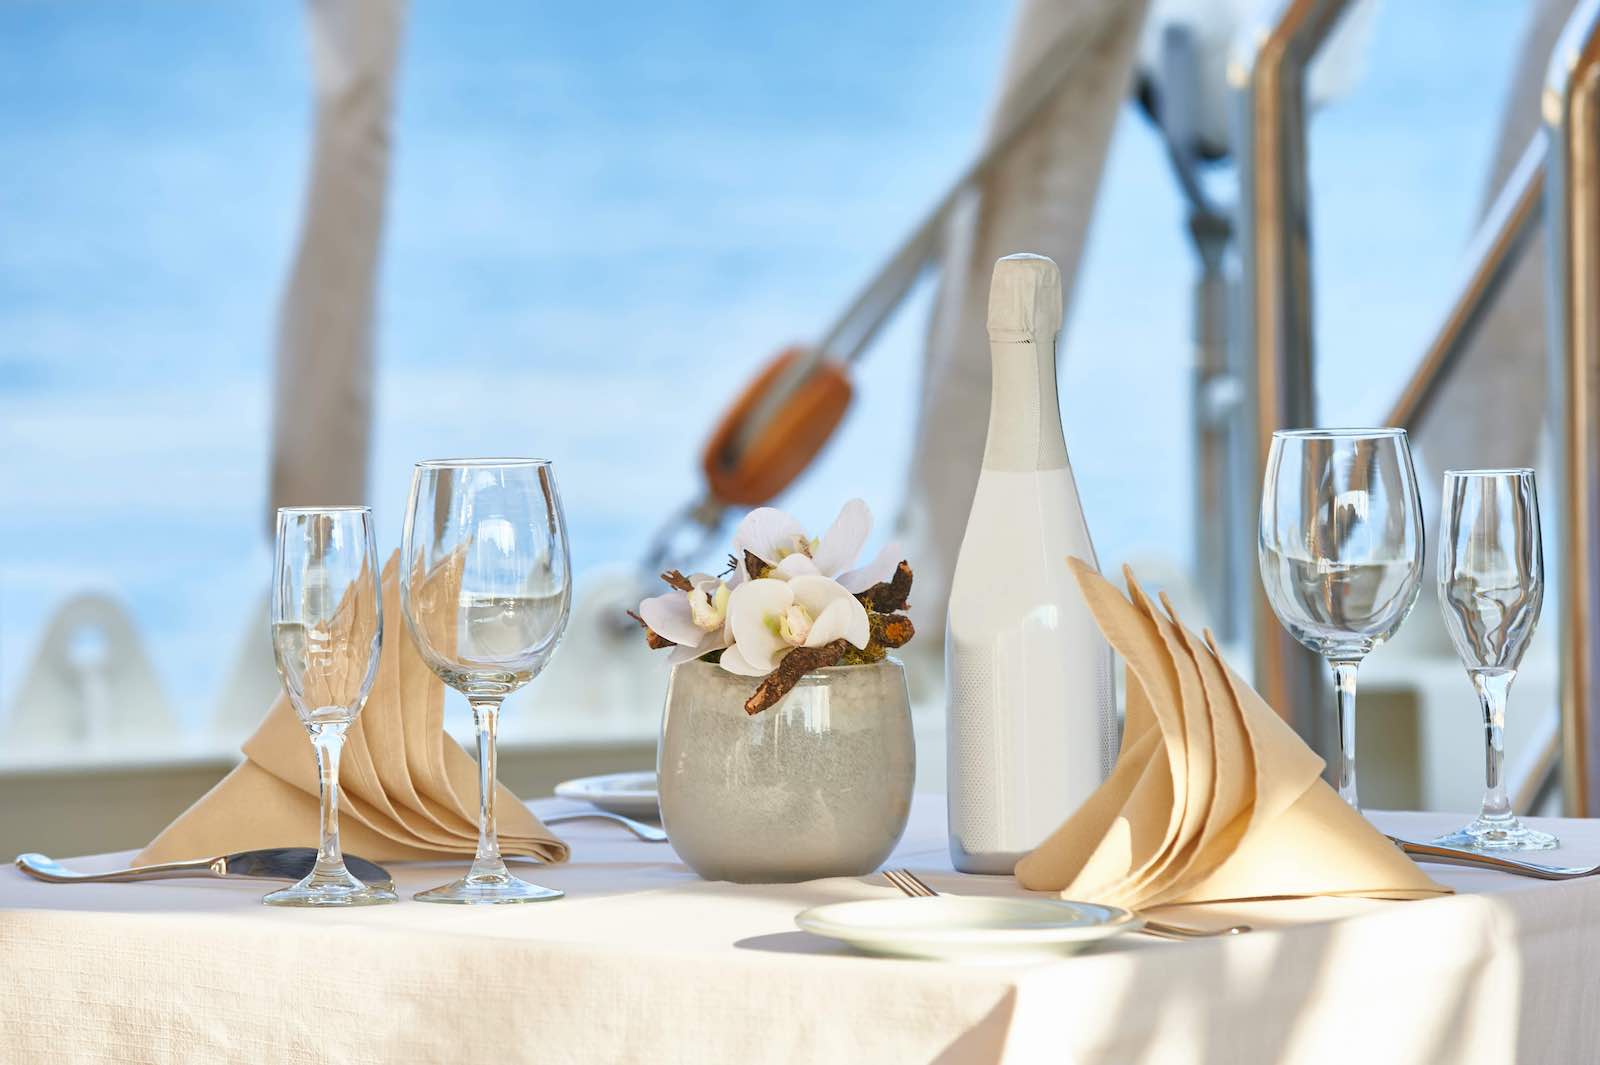 Romance on a sailing yacht. Beautiful table setting in a marine style. Yachting. Cruises